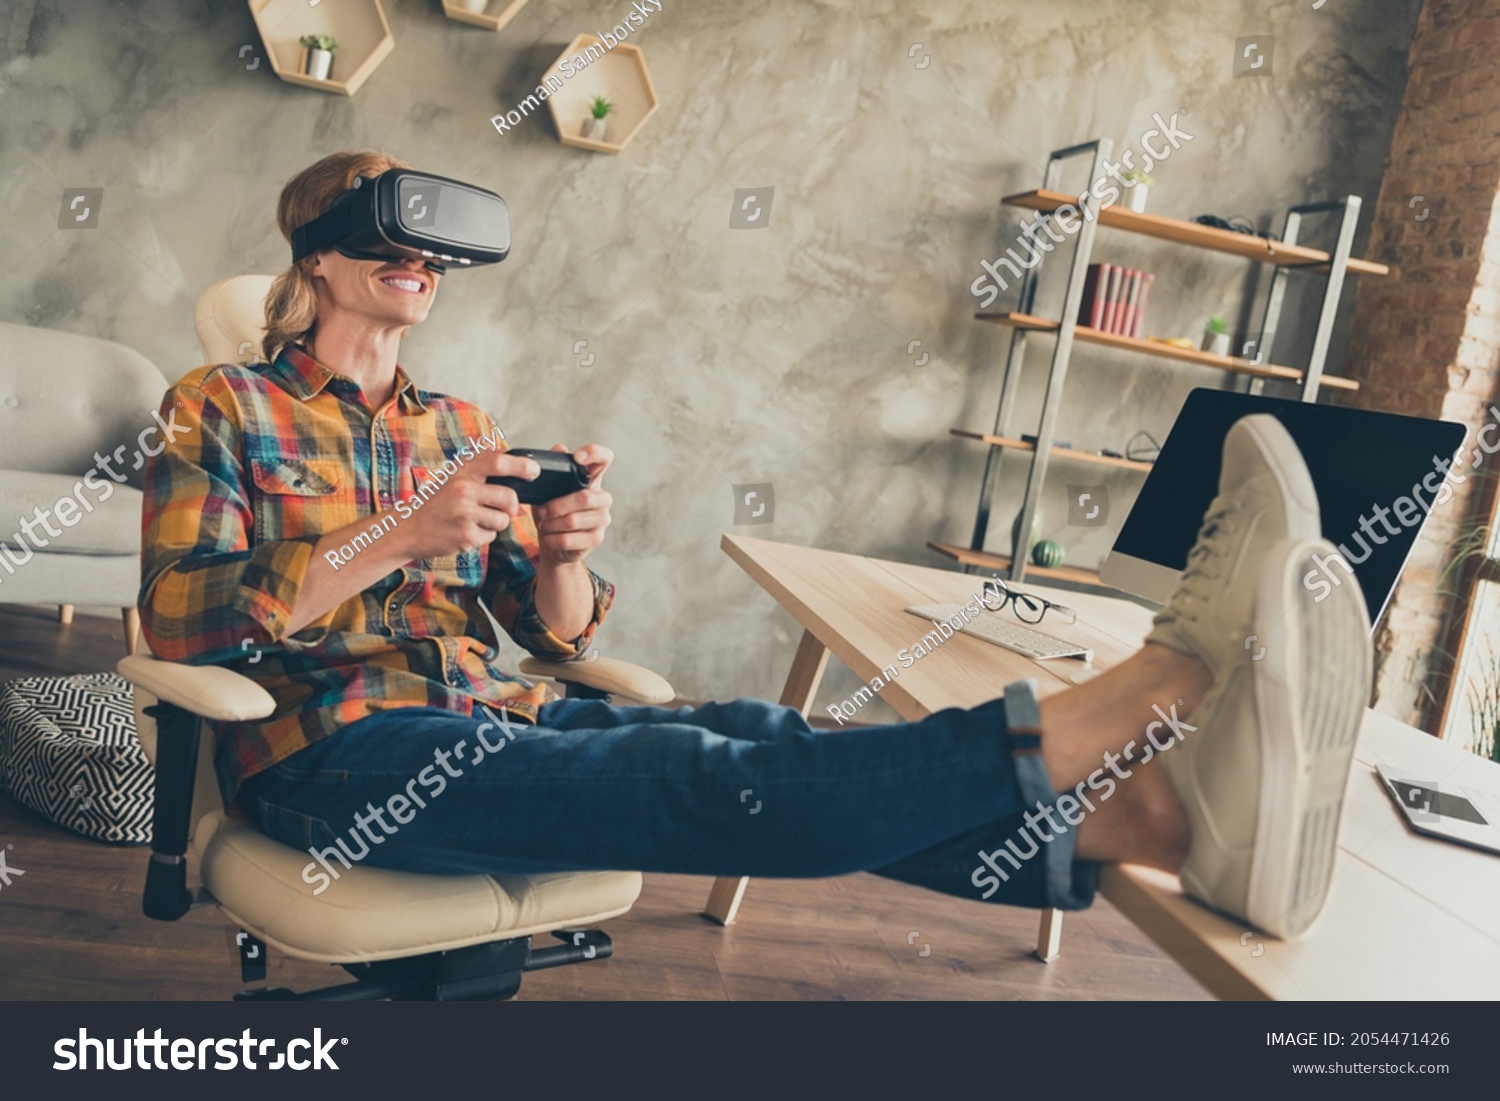 Photo portrait man in vr glasses checkered shirt playing video games with joystick after hard day #2054471426